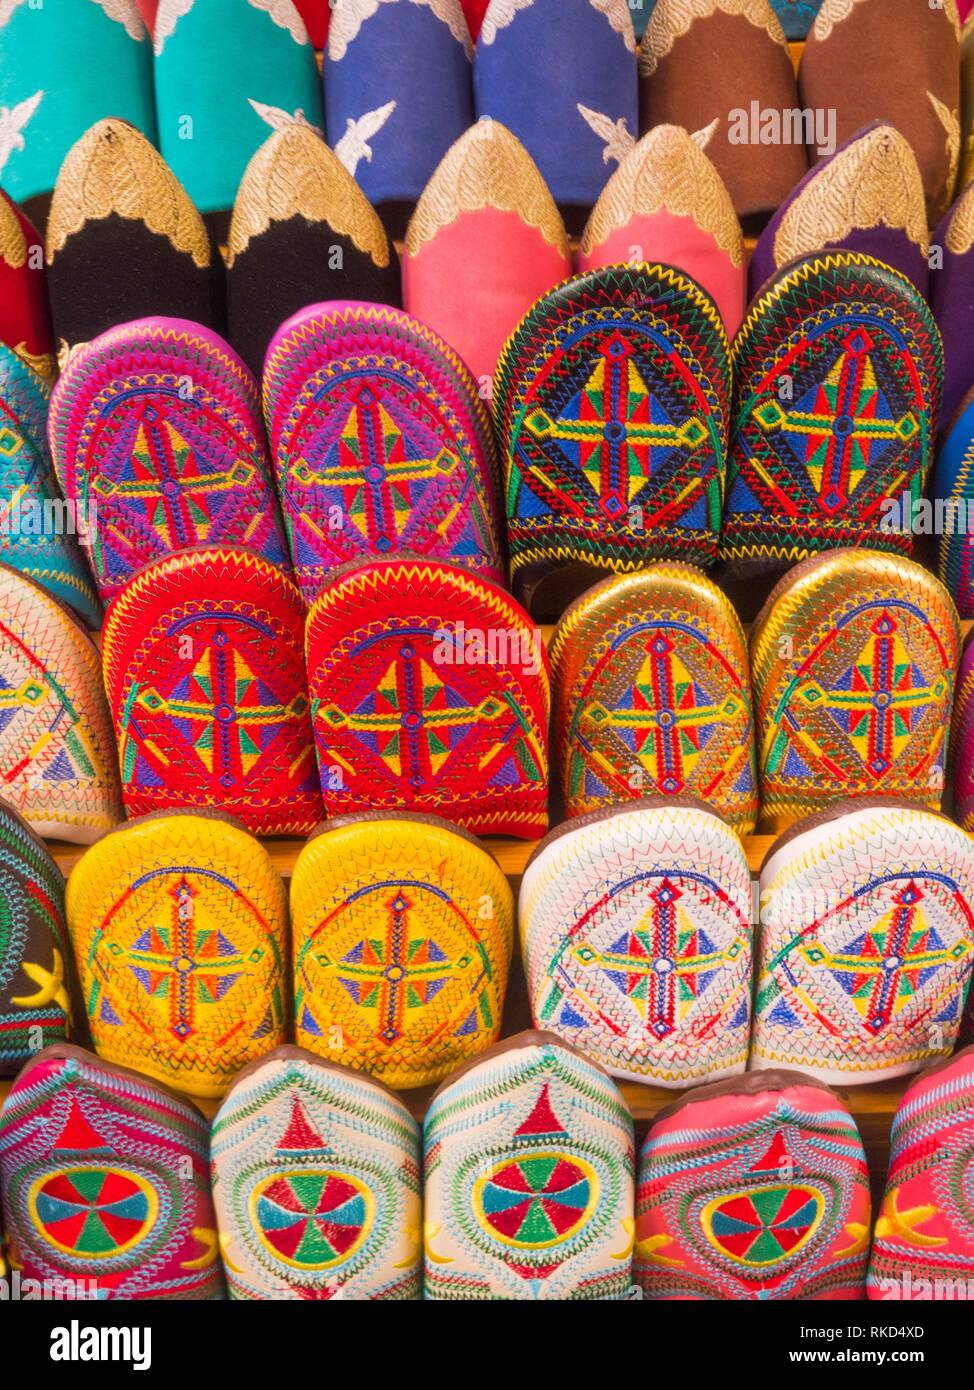 Morocco, Fes, the typical ""babouch"" shoes on a stand of the ""Medina""  (old part) of Fes Stock Photo - Alamy